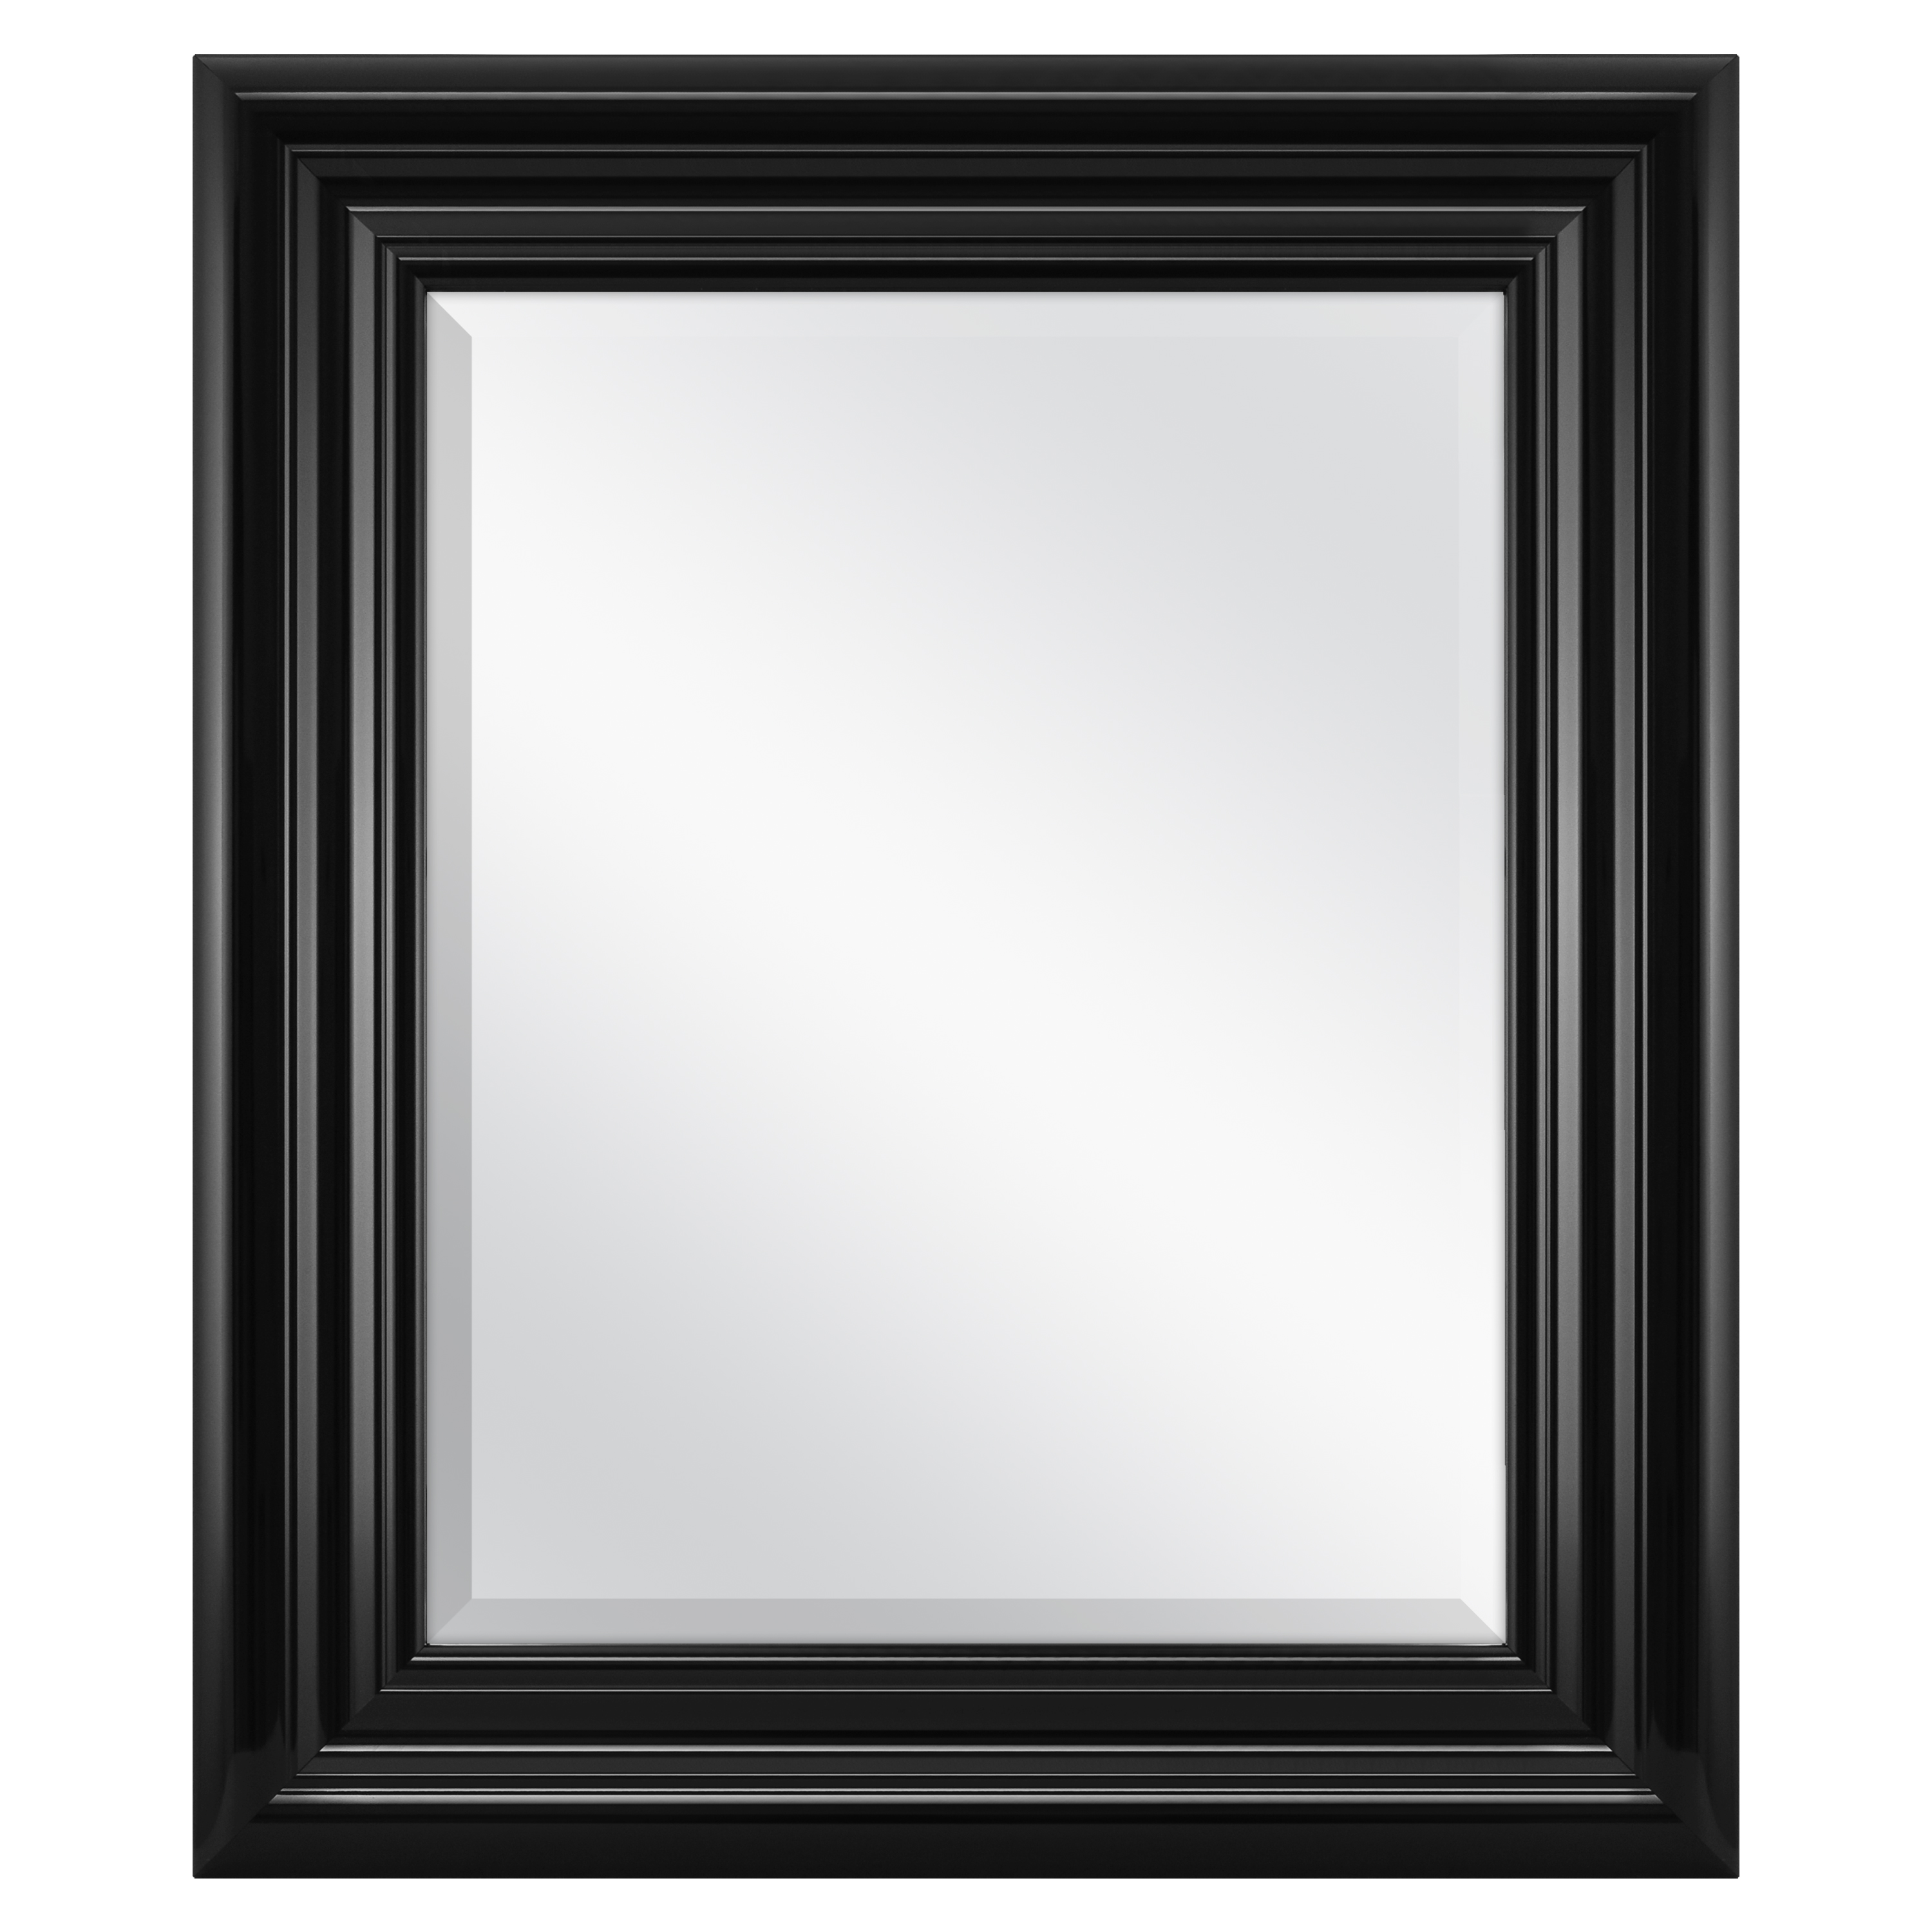 Better Homes & Gardens 23x27 Inch Black Beveled Wall Mirror - image 1 of 6